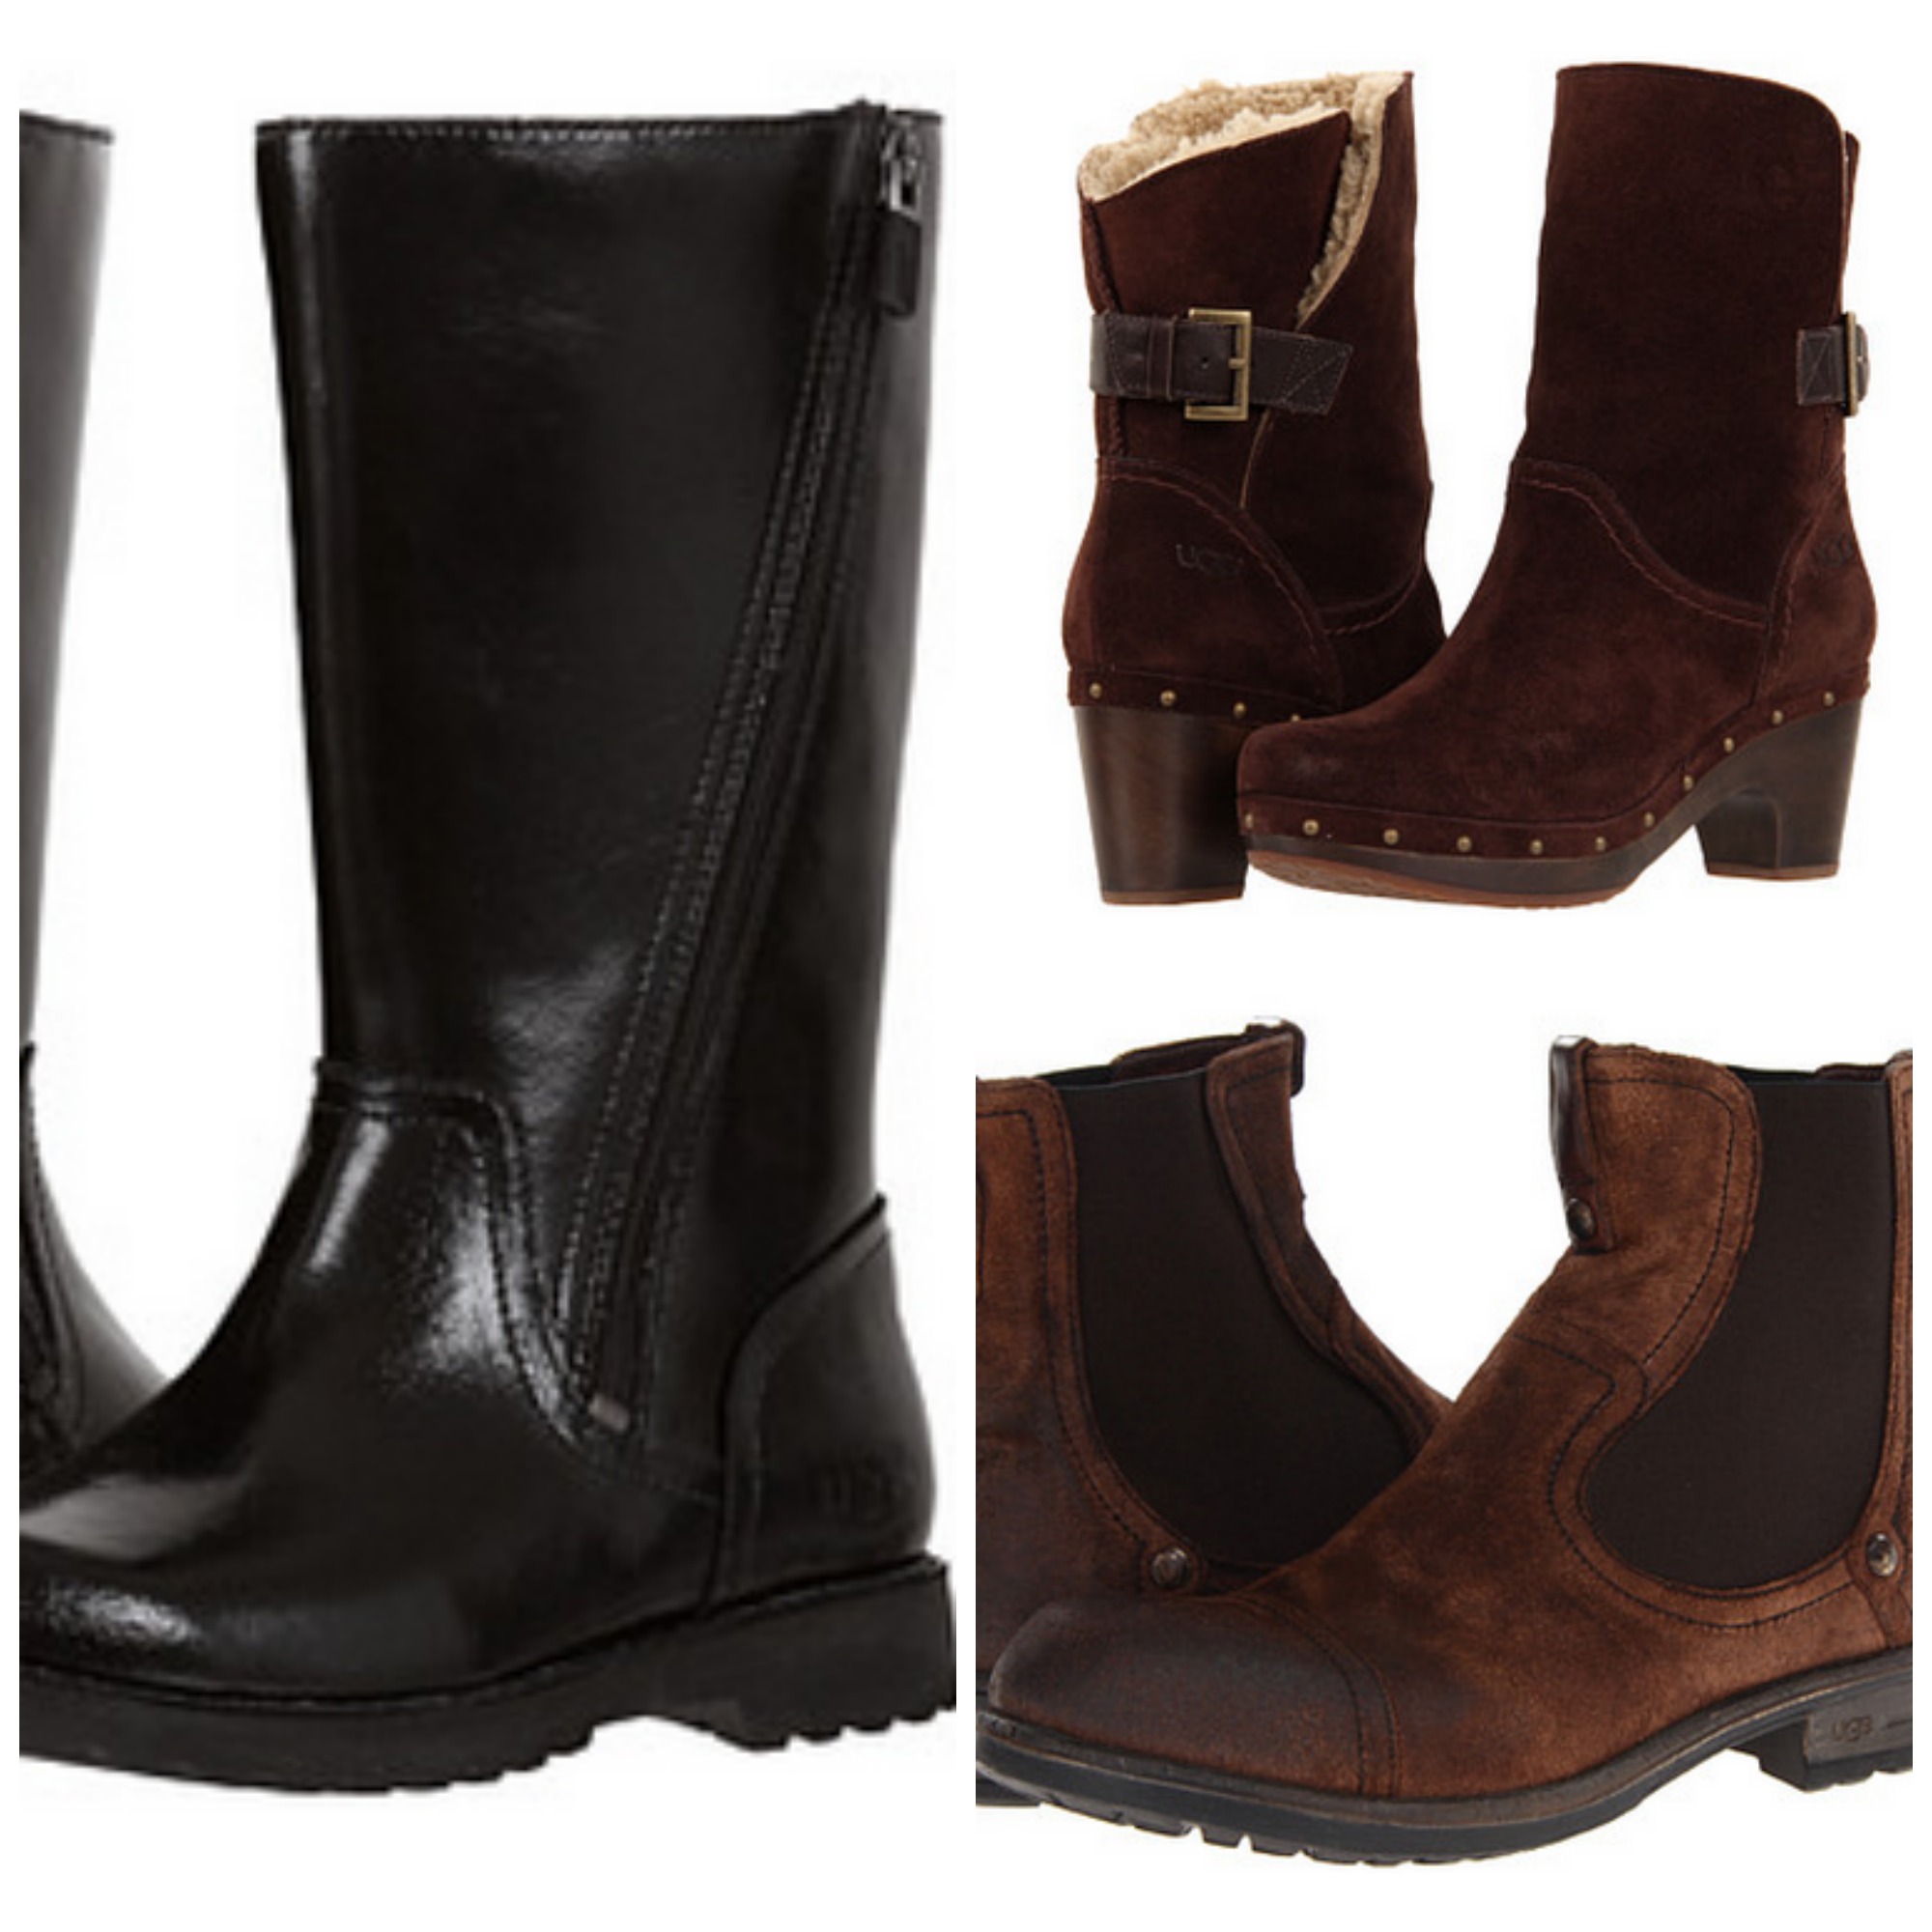 Uggs Boots Sale Up To 70% Off + Free Shipping - My Frugal Adventures